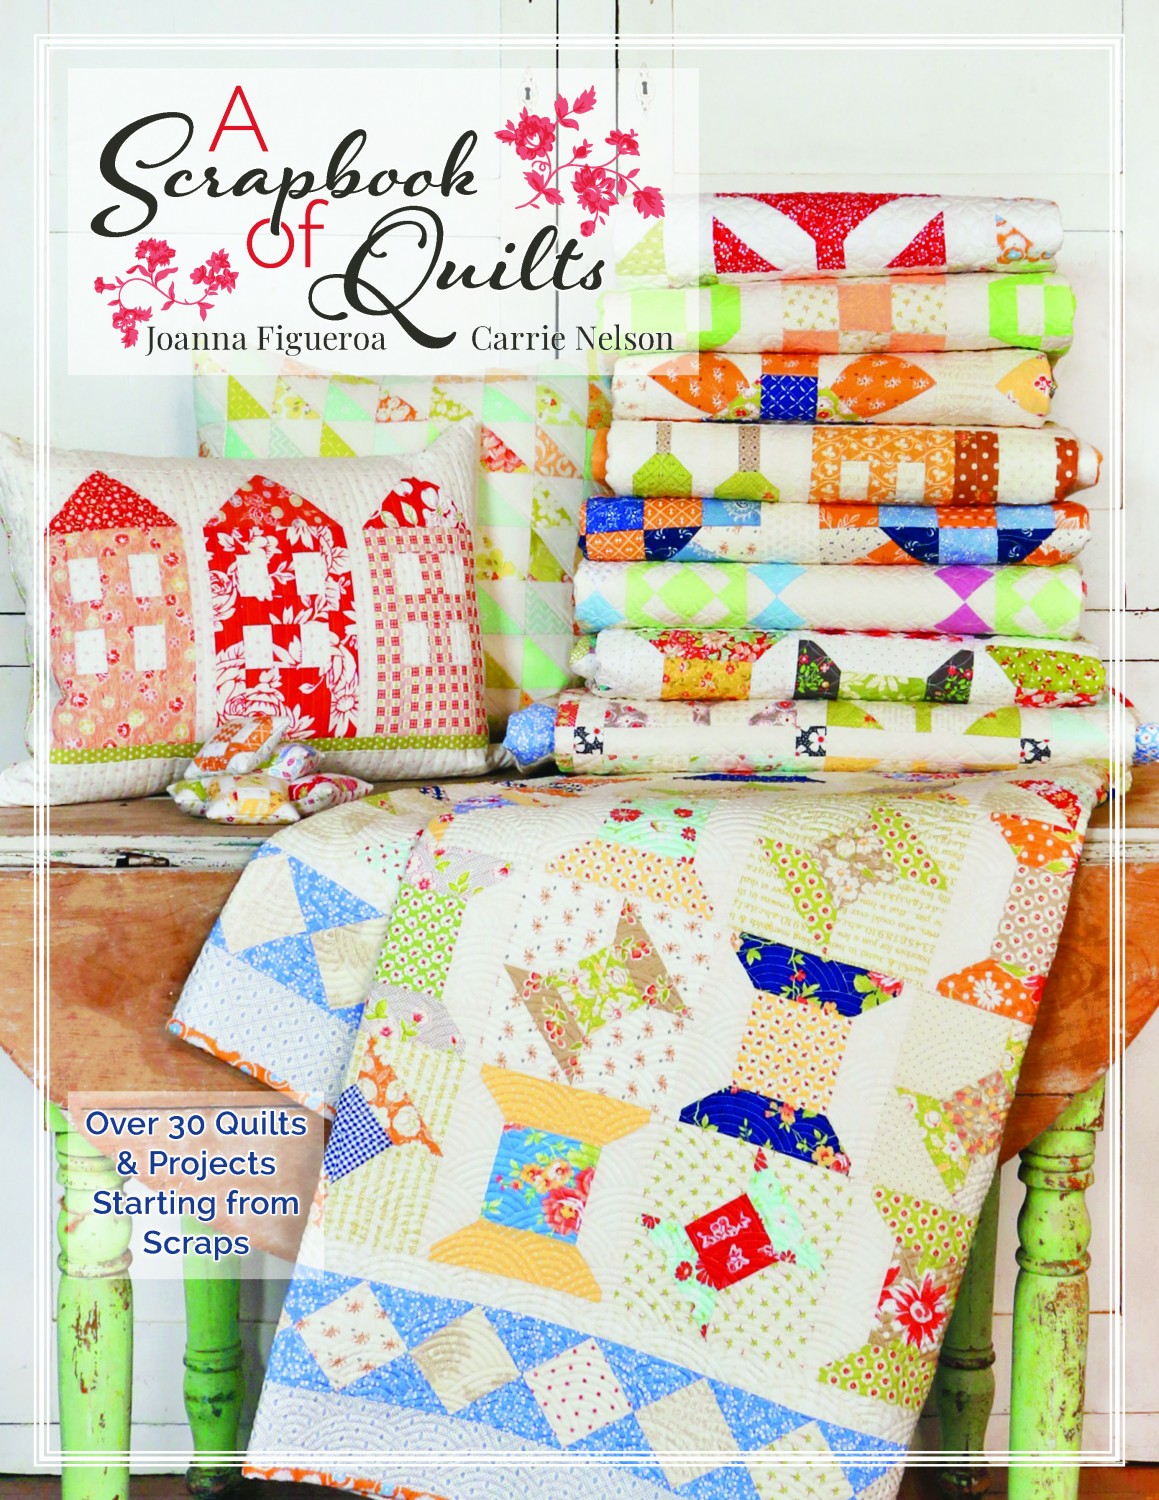 A Scrapbook Of Quilts Quilt Pattern Book by Carrie Nelson and Joanna Figueroa for It's Sew Emma